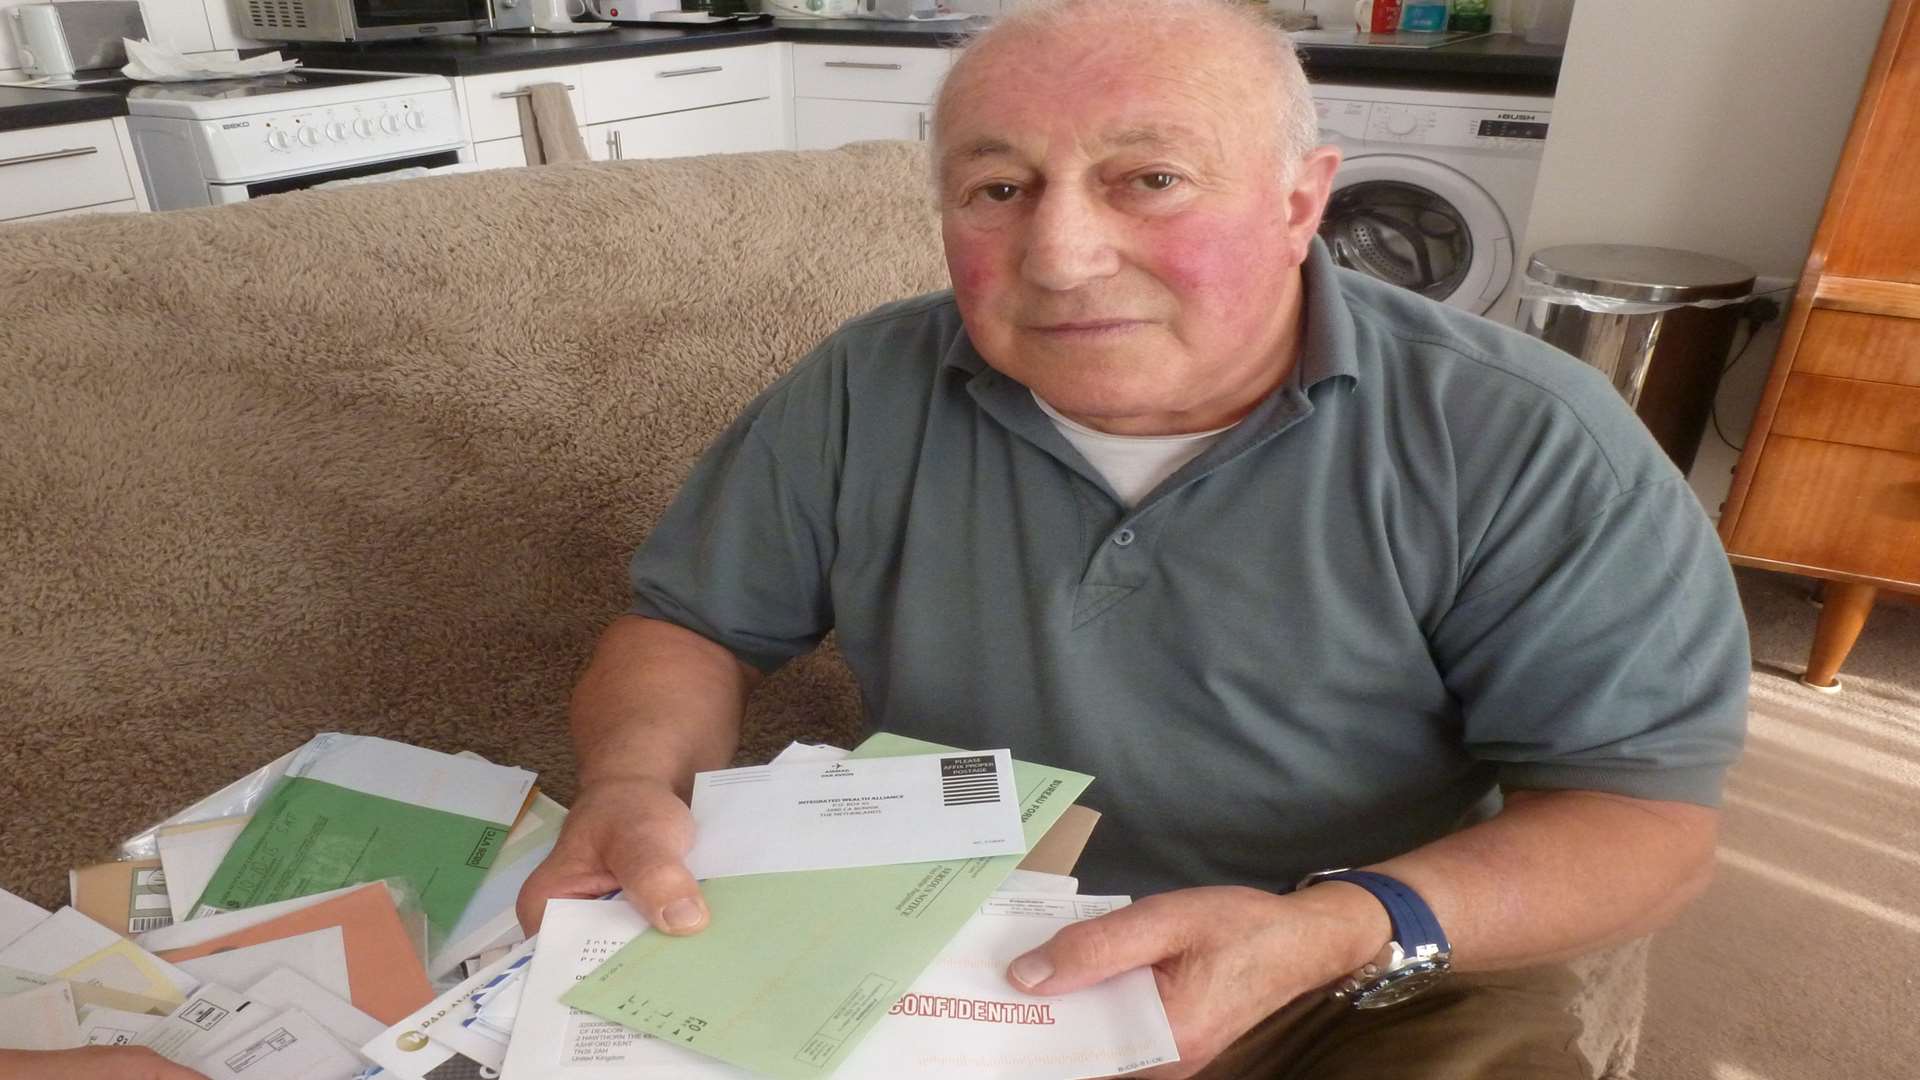 Colin Deacon with some of the scam letters